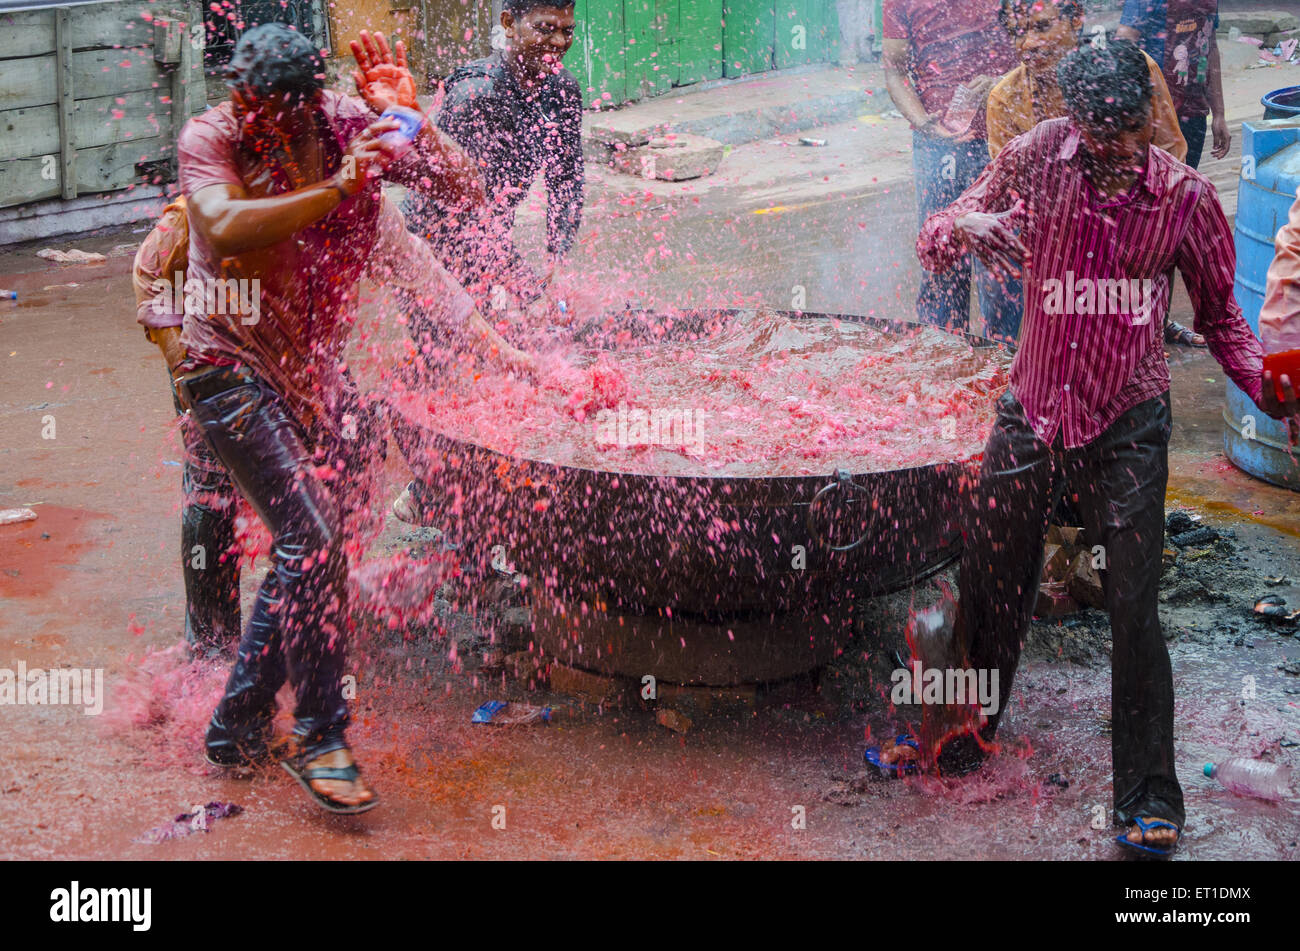 People pouring water with colour in Holi festival  Jodhpur at Rajasthan India Stock Photo